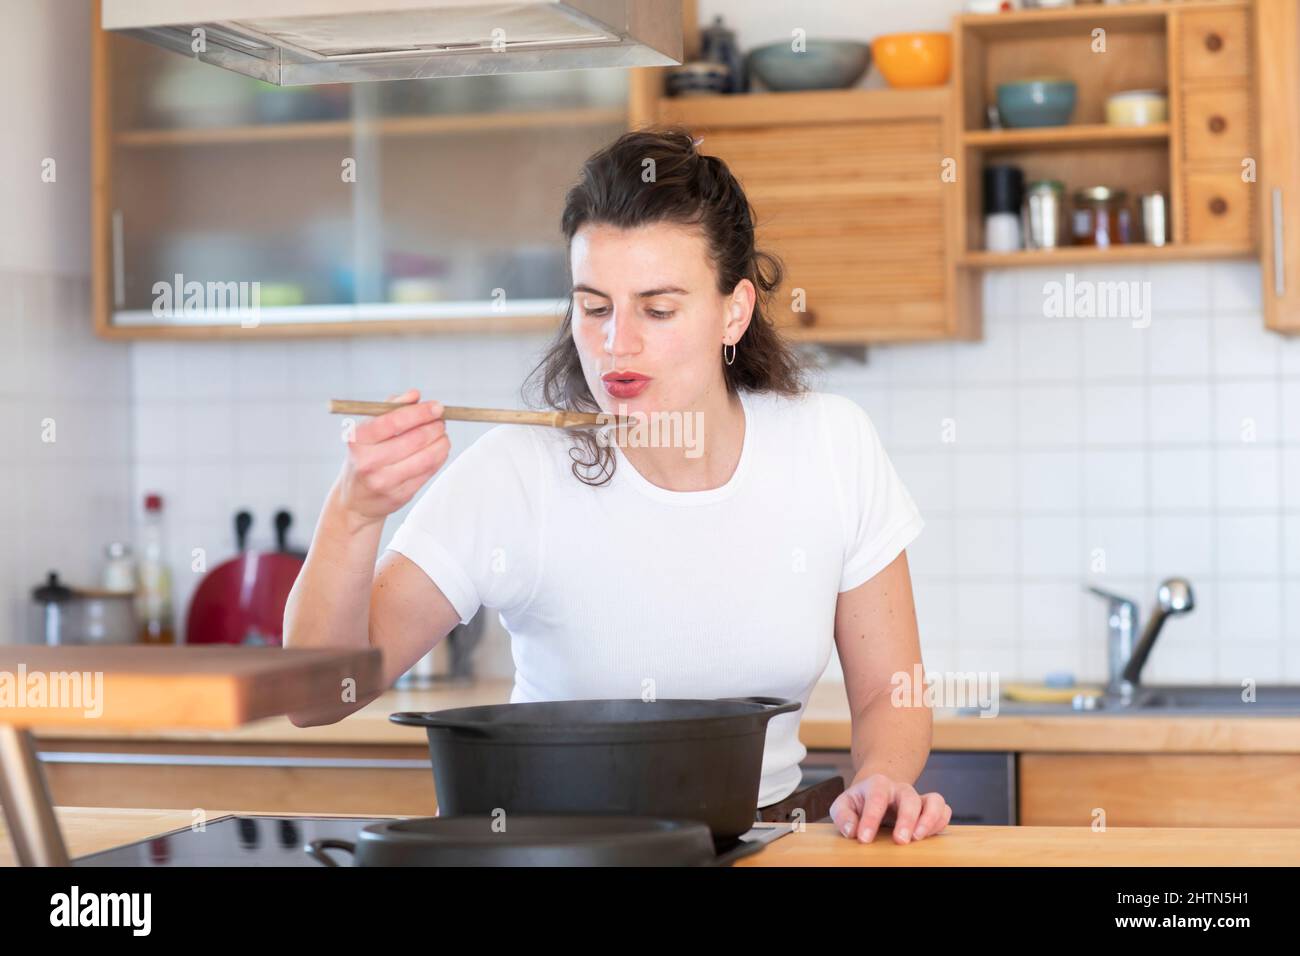 Smiling woman cooking Stock Photo